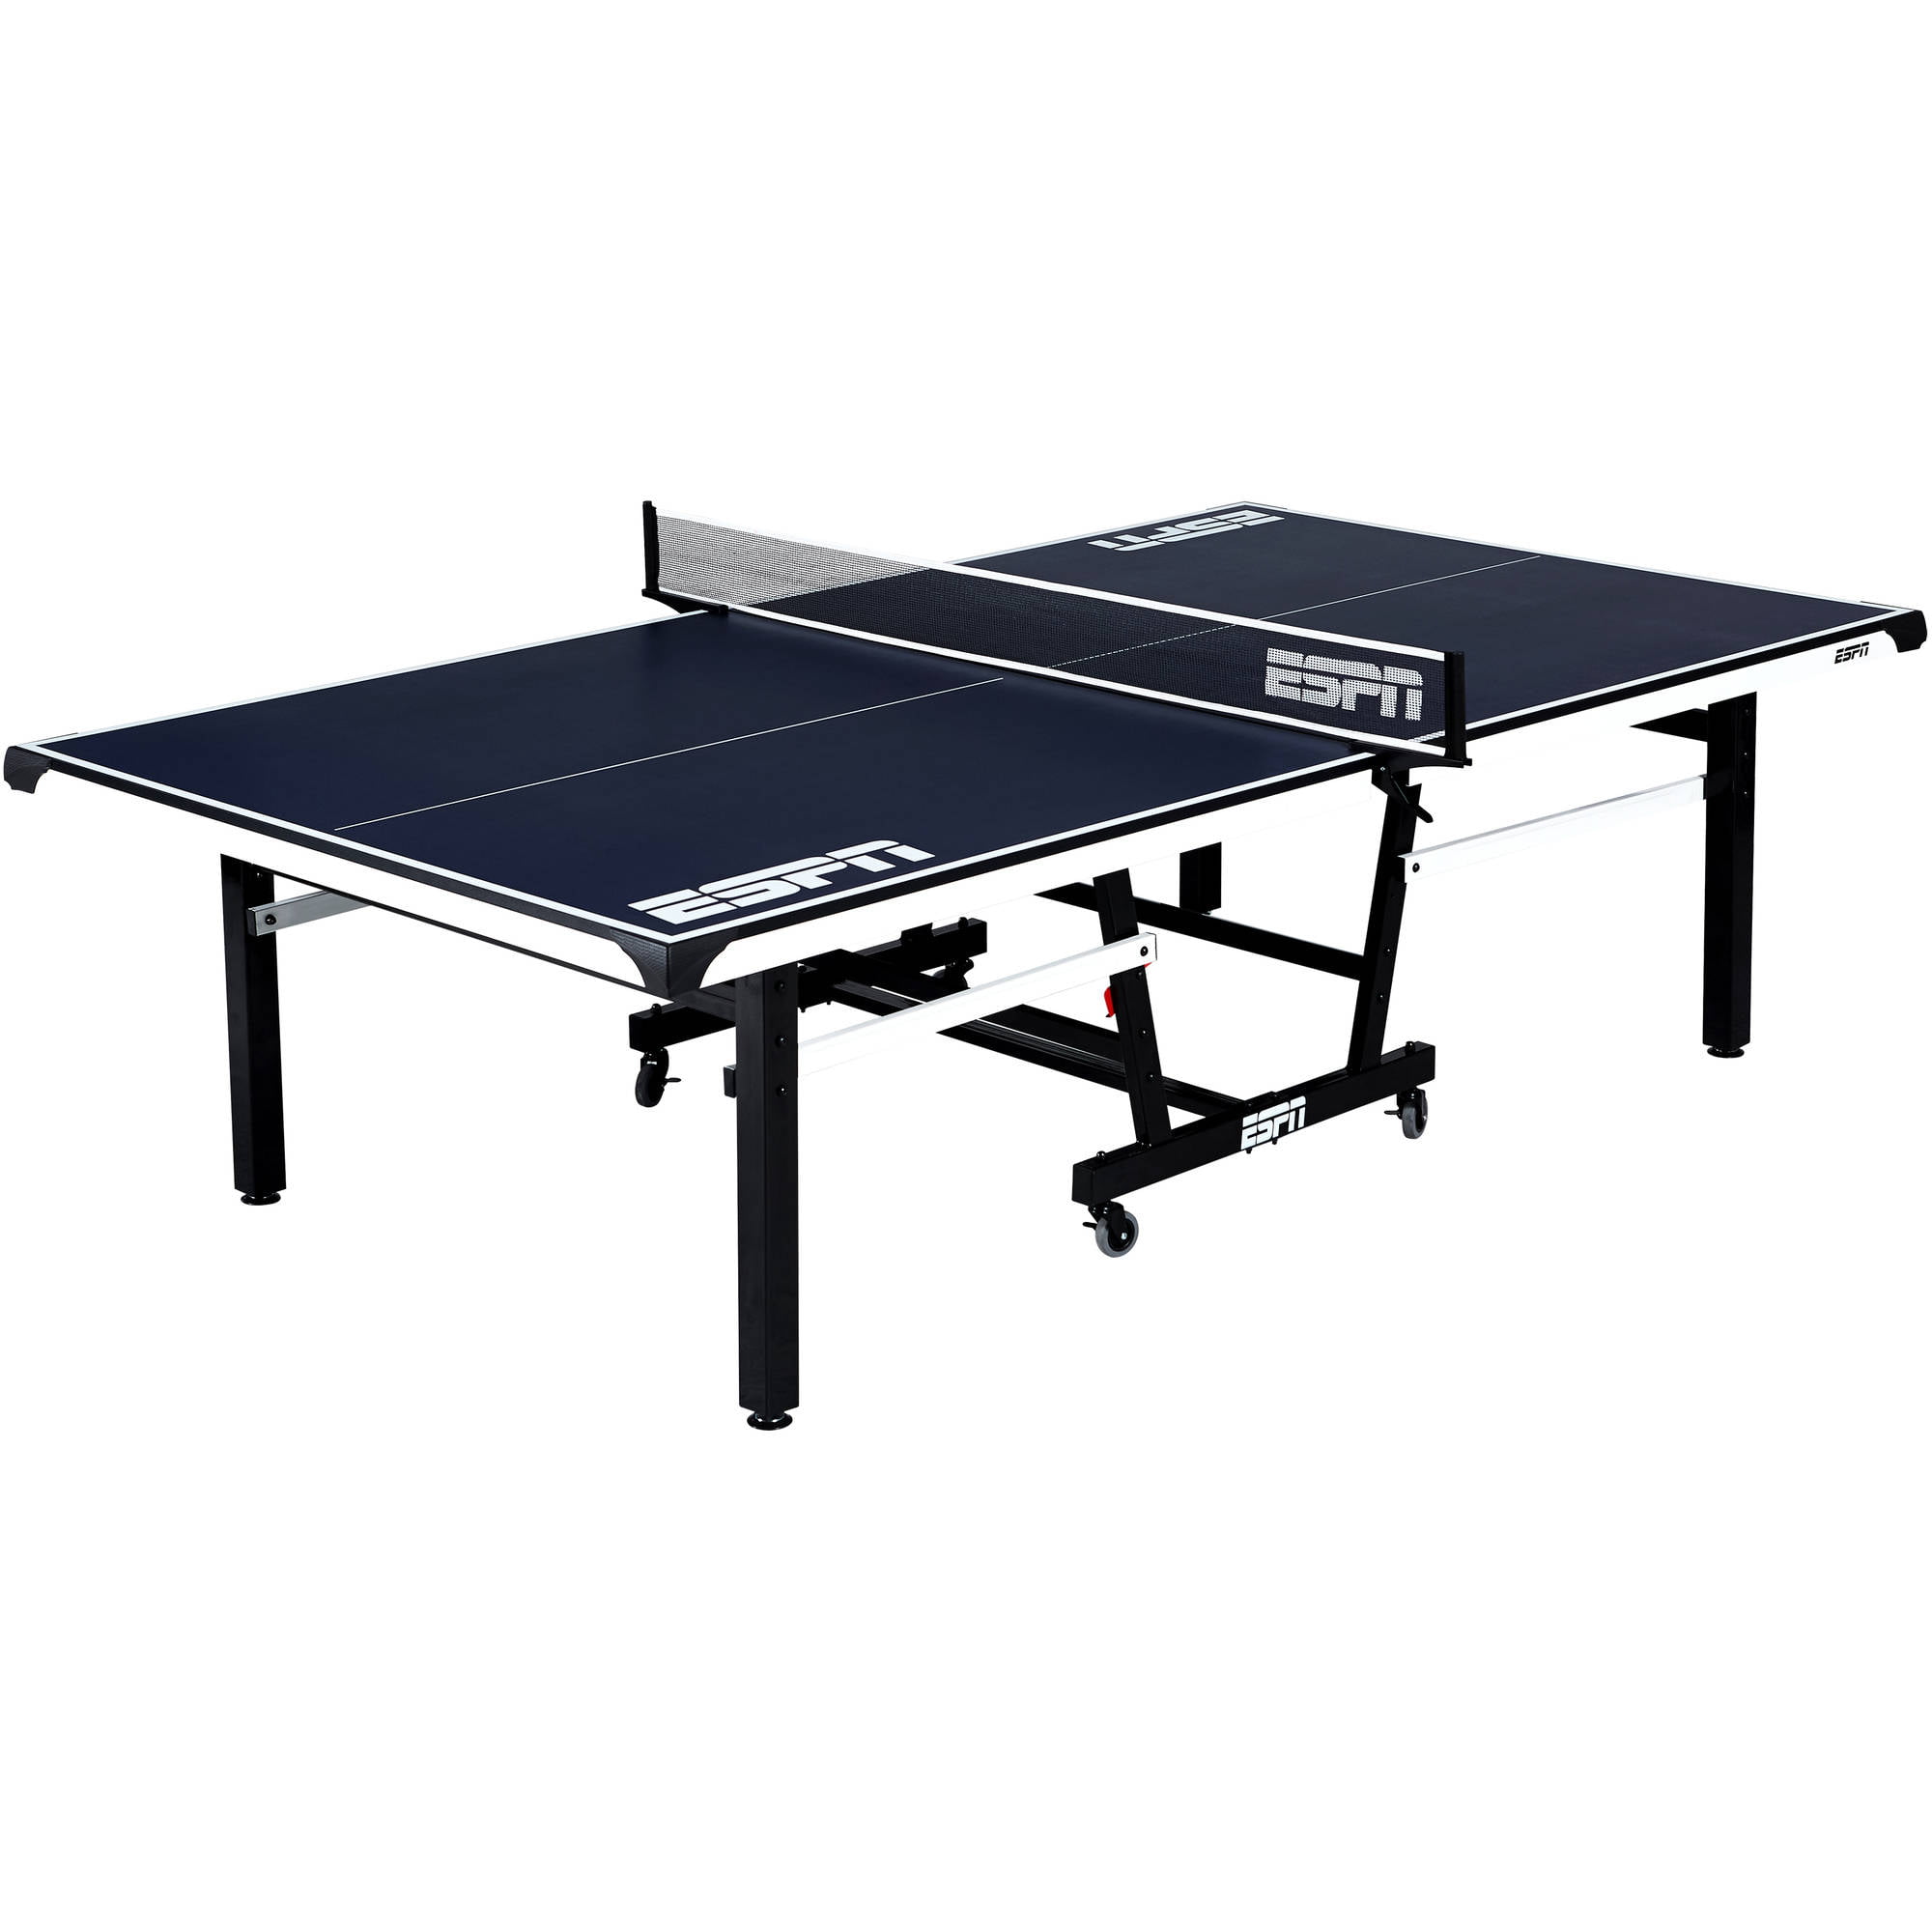 ESPN Ping Pong Official Size Table Tennis Table with Table ...